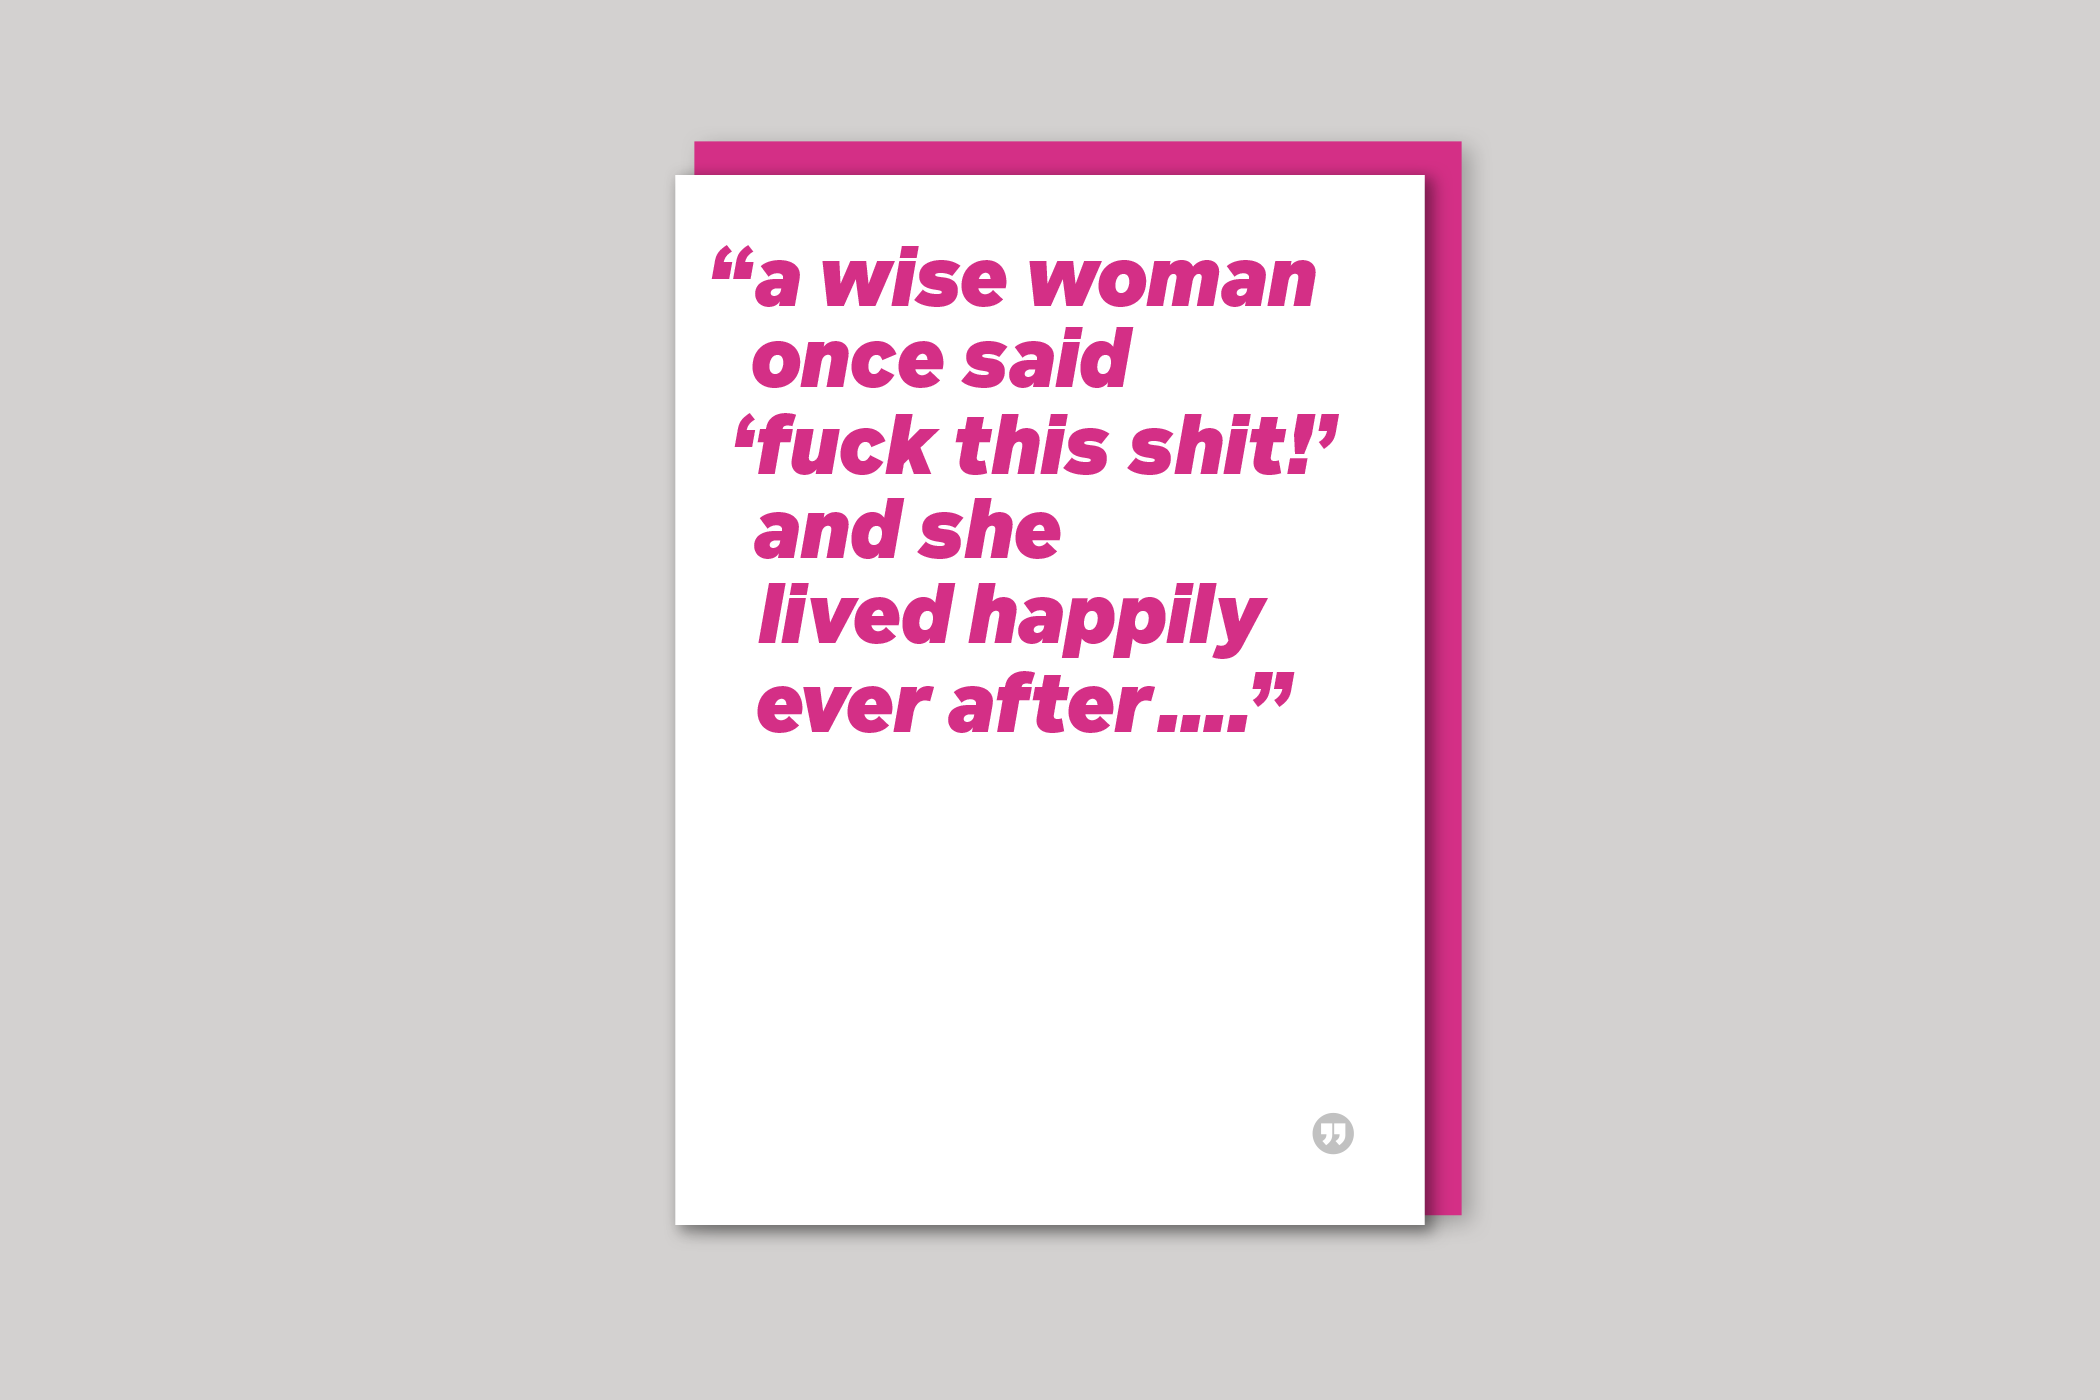 Wise Woman funny quotation from Quotecards range of cards by Icon, back page.